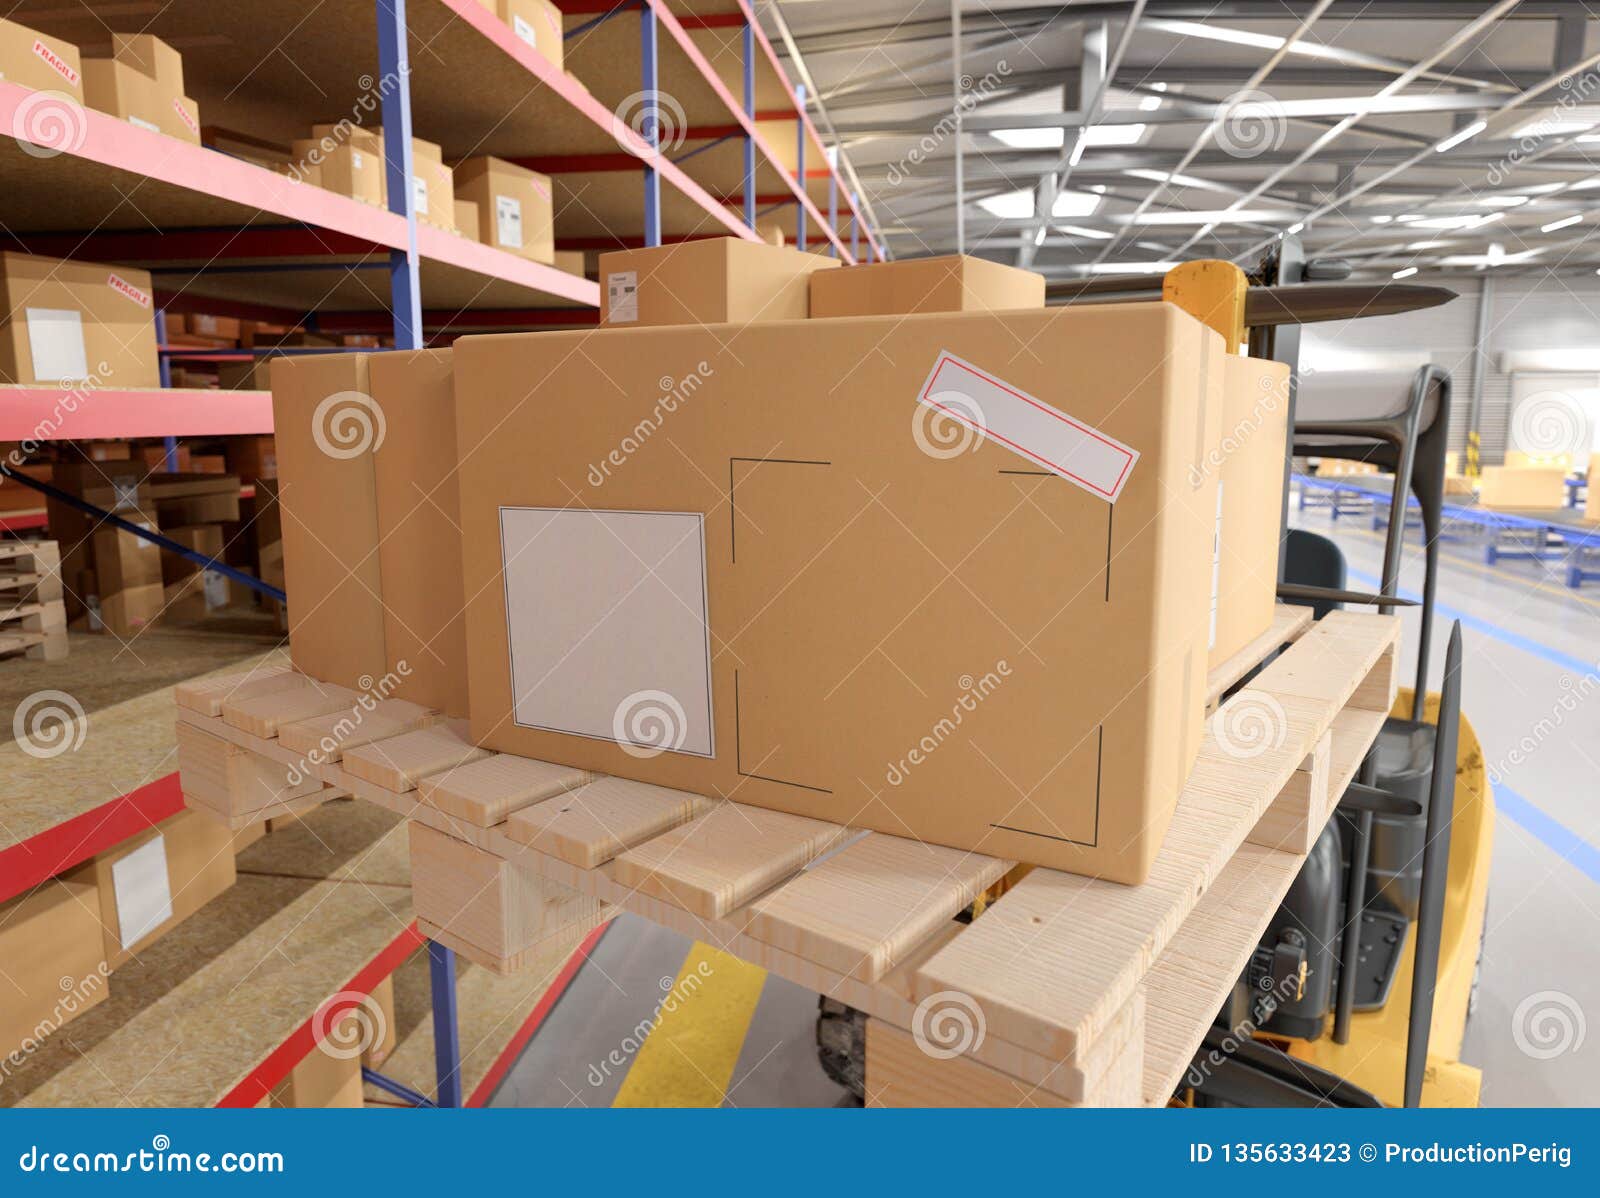 Download Cardbox Mock Up In A Warehouse - 3d Rendering Stock ...